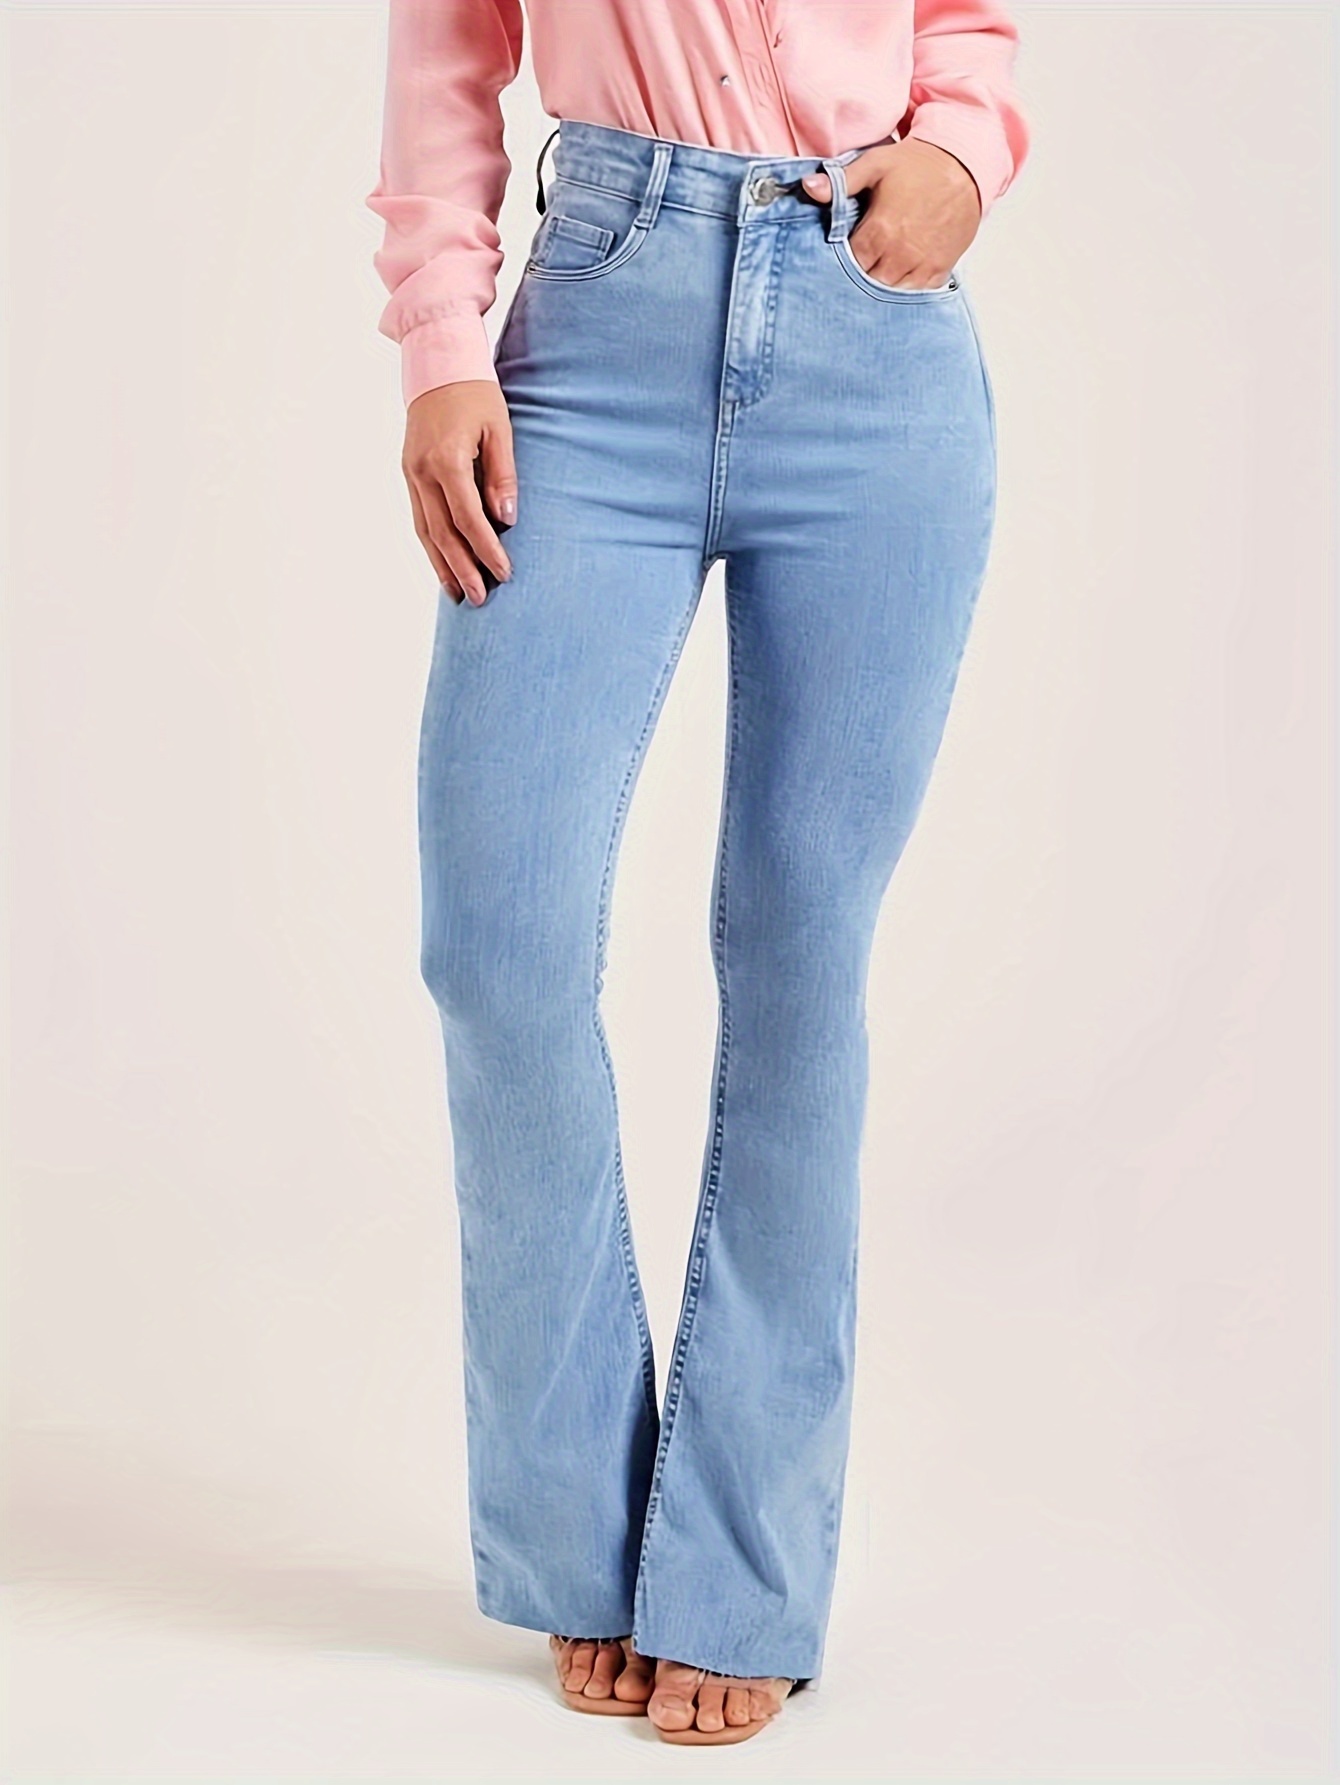 Women Casual High Waist Skinny Flare Jeans With Buttons Full